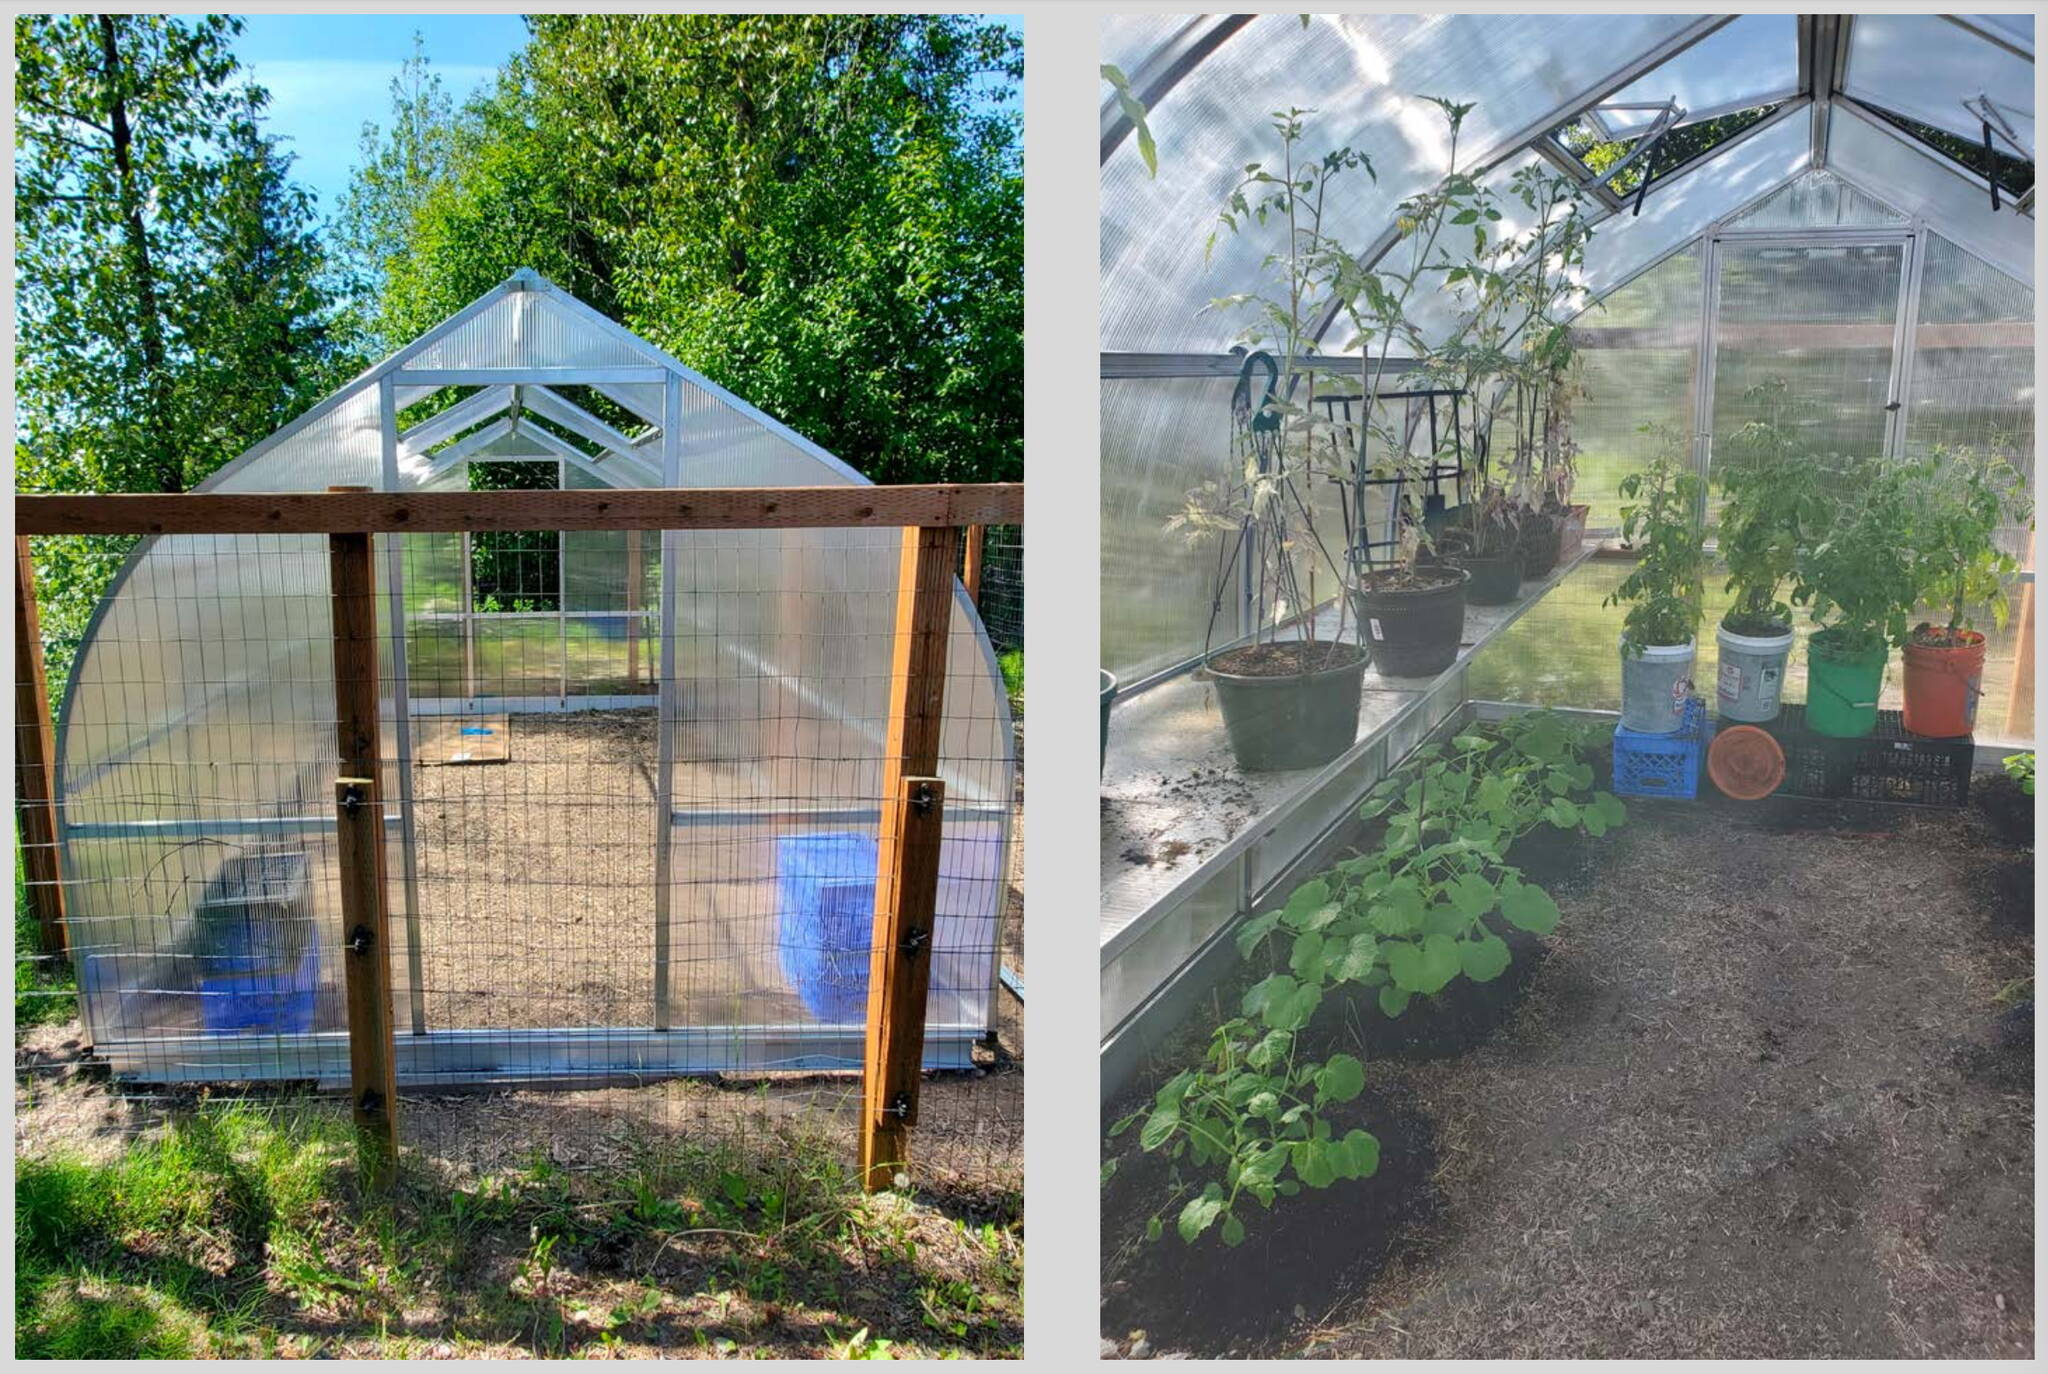 A greenhouse operated by the Southeast Alaska Food Bank was purchased with a state grant, with the organization hoping to buy two more greenhouses with funding from the Food Bank of Alaska. (Photos by the Southeast Alaska Food Bank)